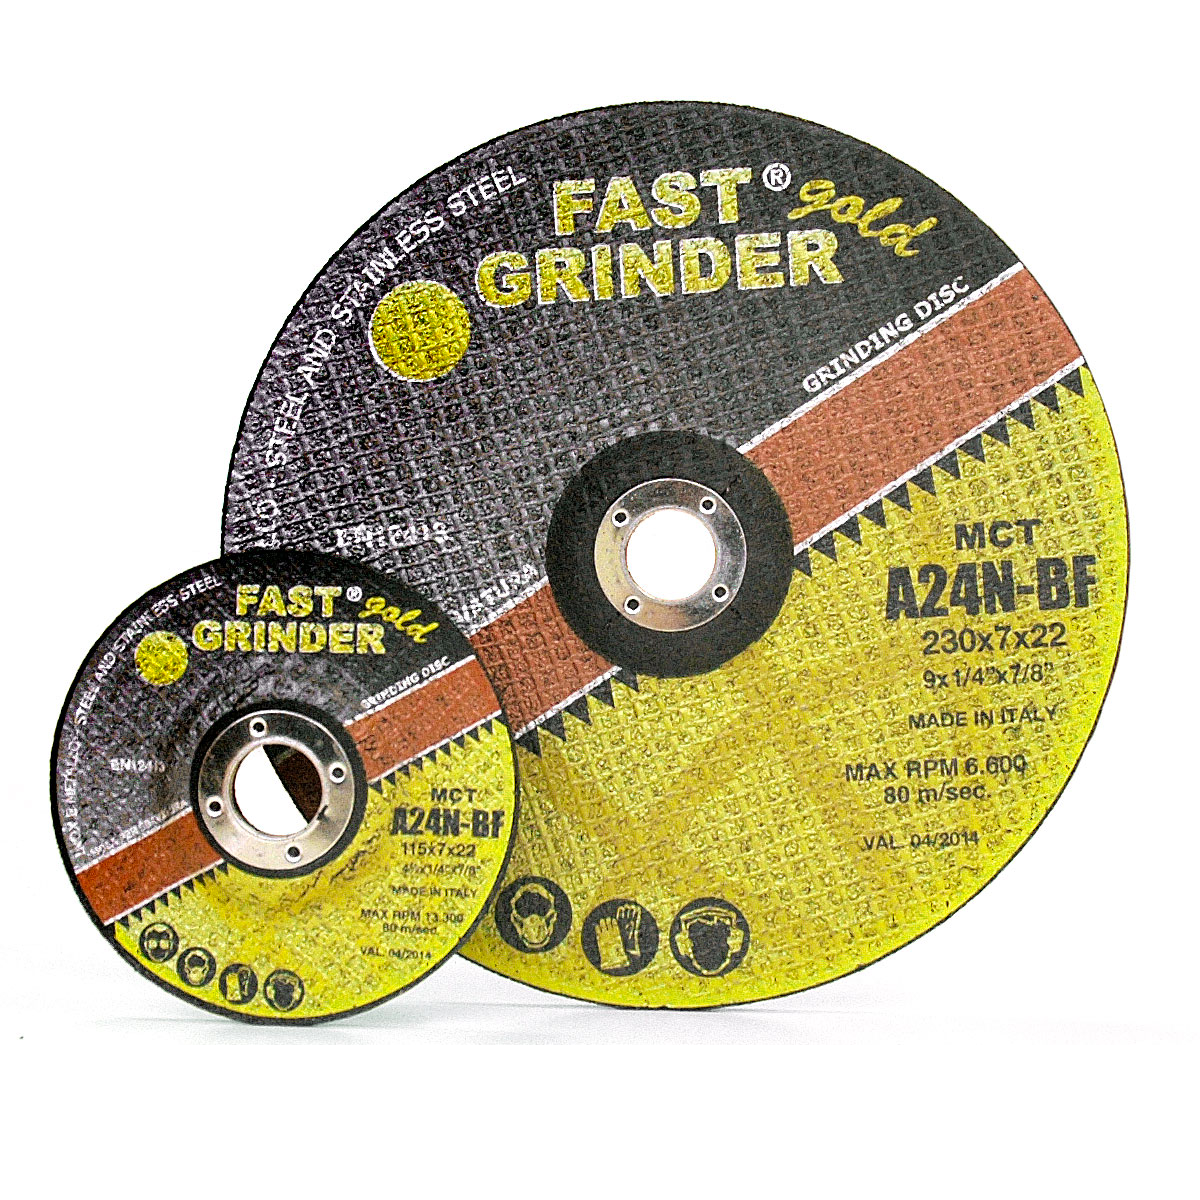 Industrial Grinding Discs MCS-GOLD A24N iron/stainless steel - Rosver - Conf.25pz